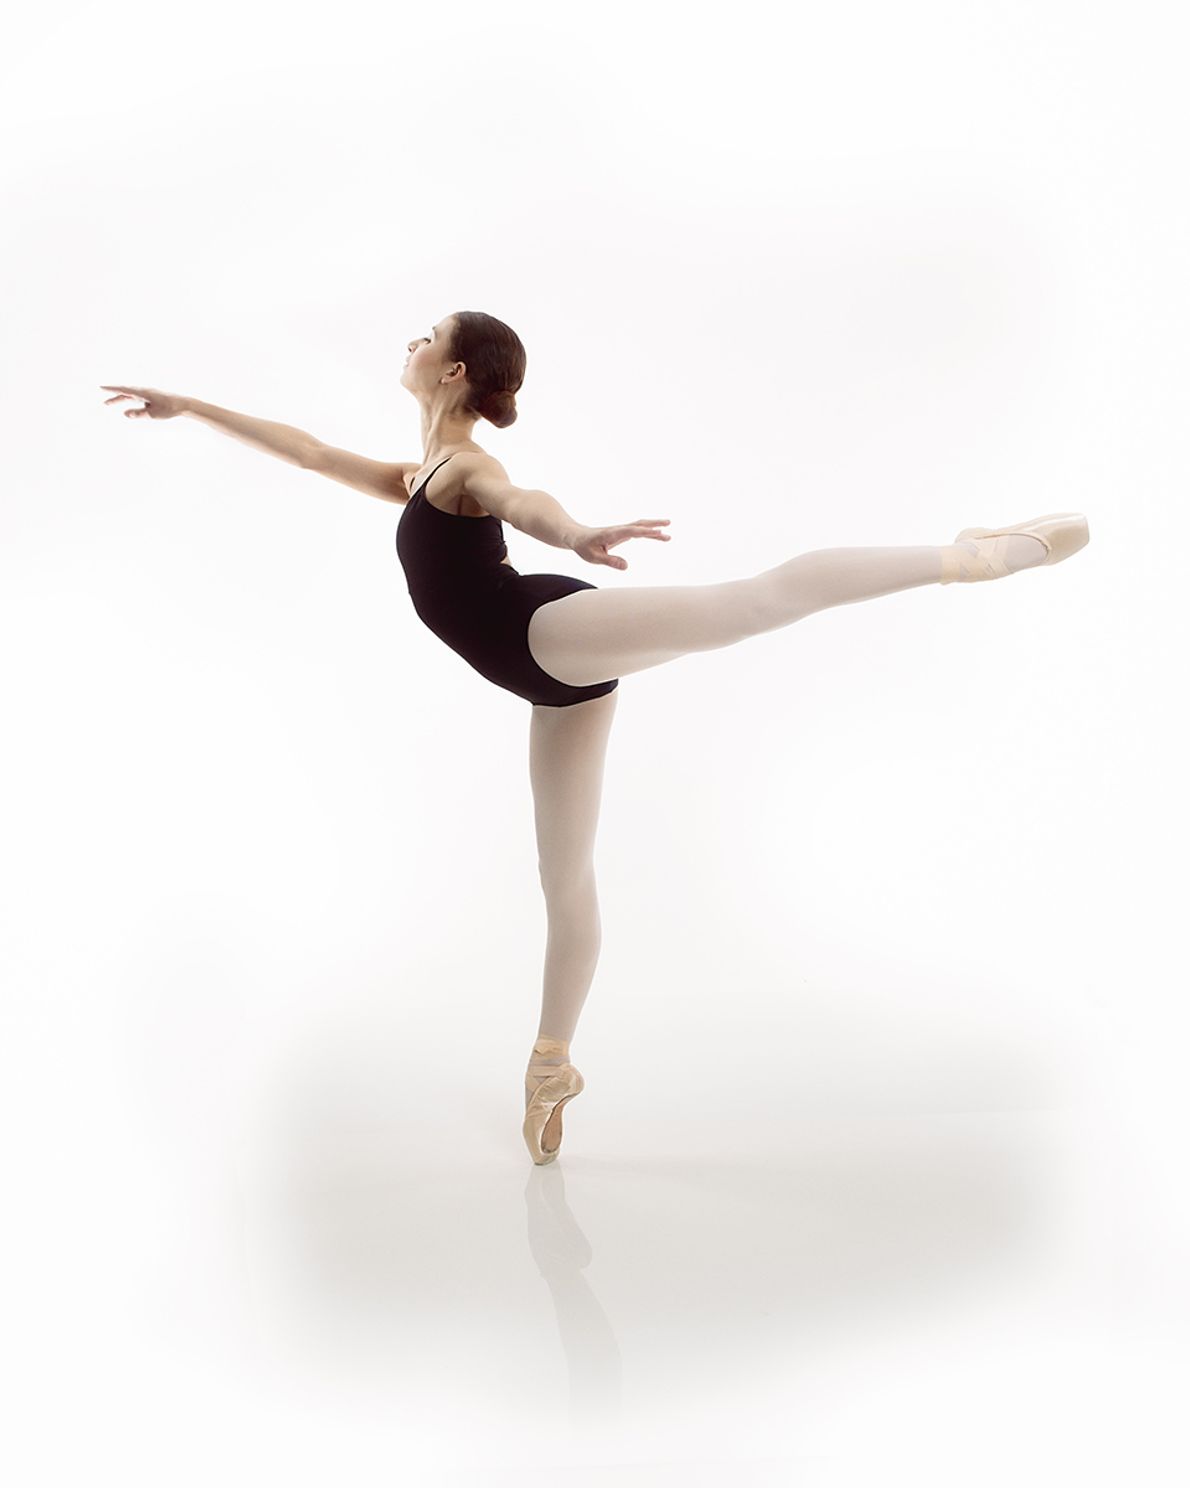 portrait of a young woman in an arabesque ballet pose on white with a reflective floor